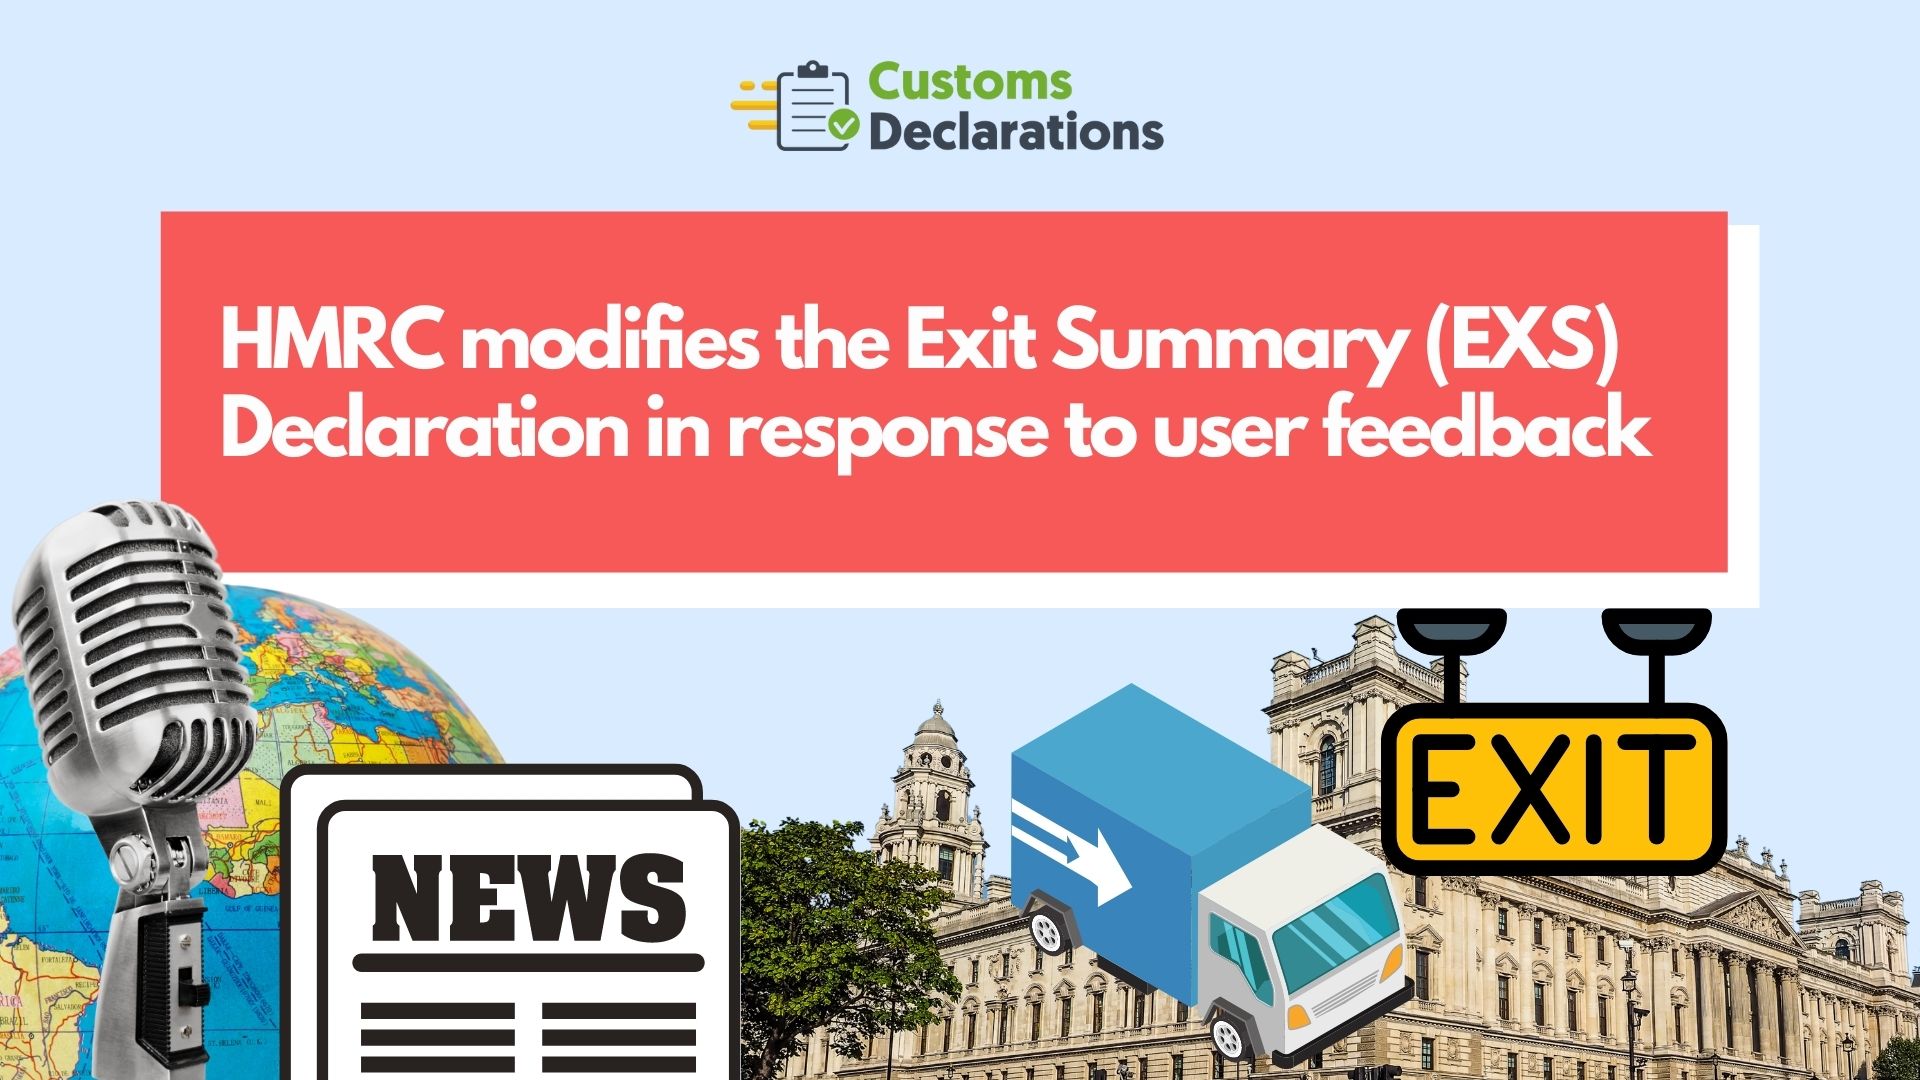 HMRC modifies the Exit Summary (EXS) Declaration in response to user feedback